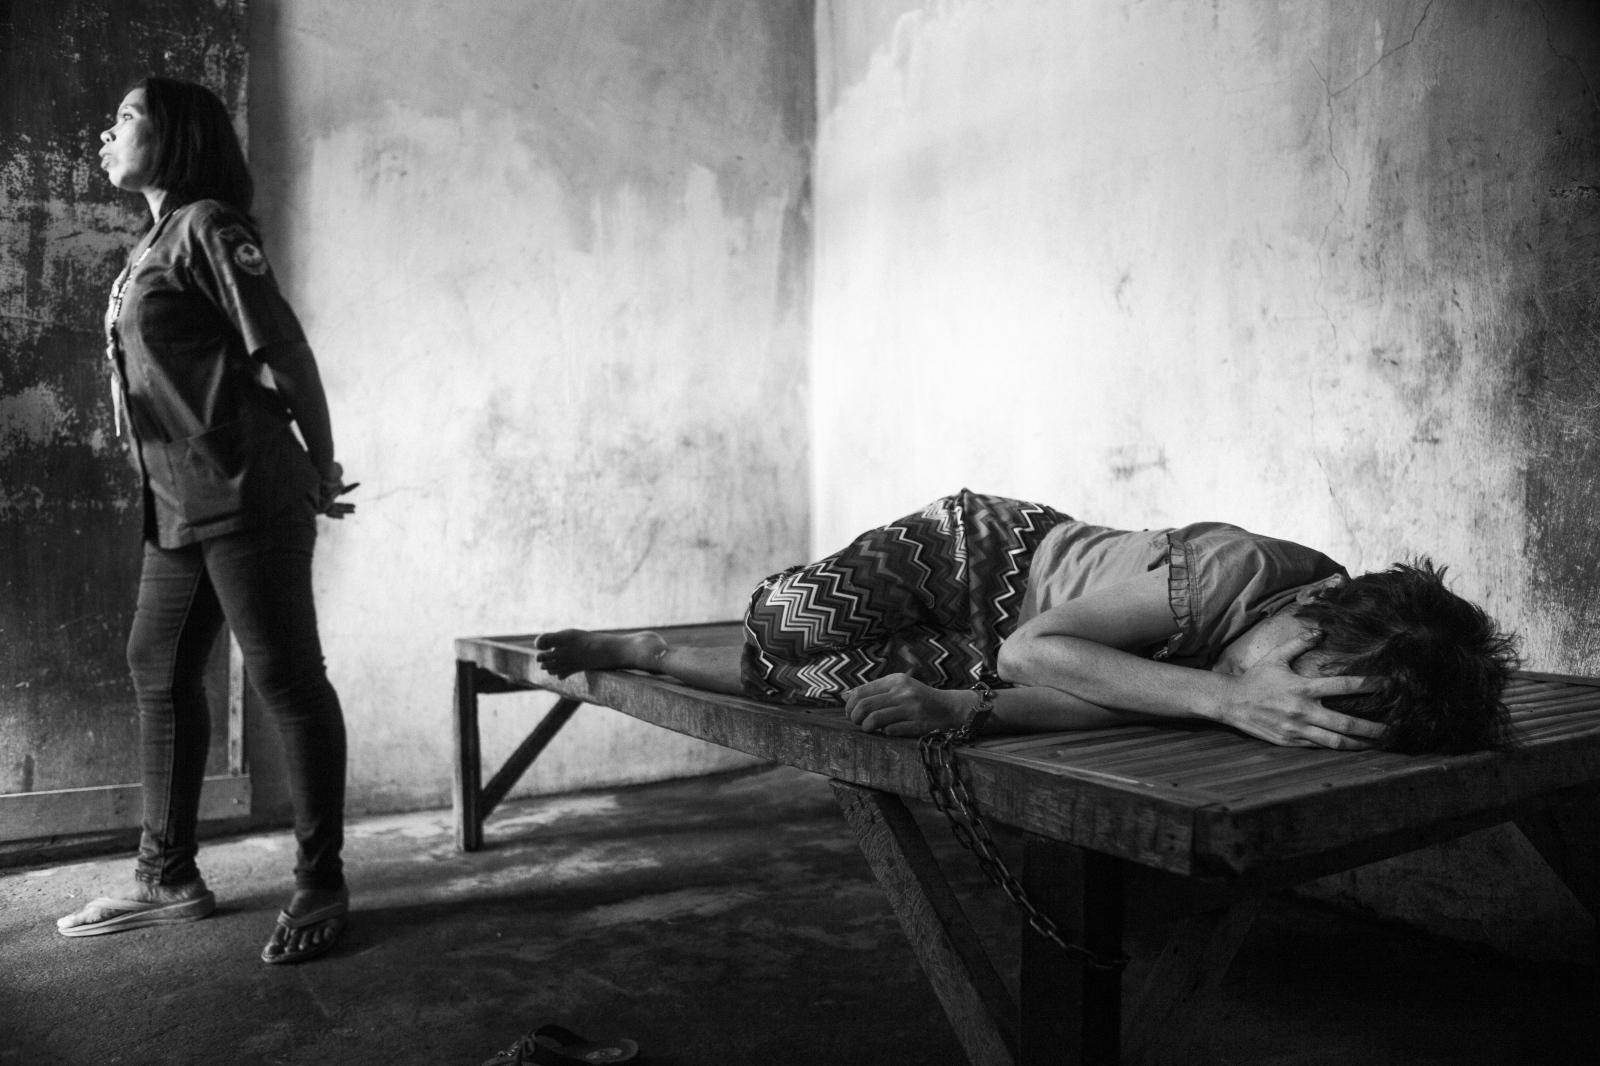 Mental Health in Indonesia - Naca chained to her her bed while a caretaker comes into...